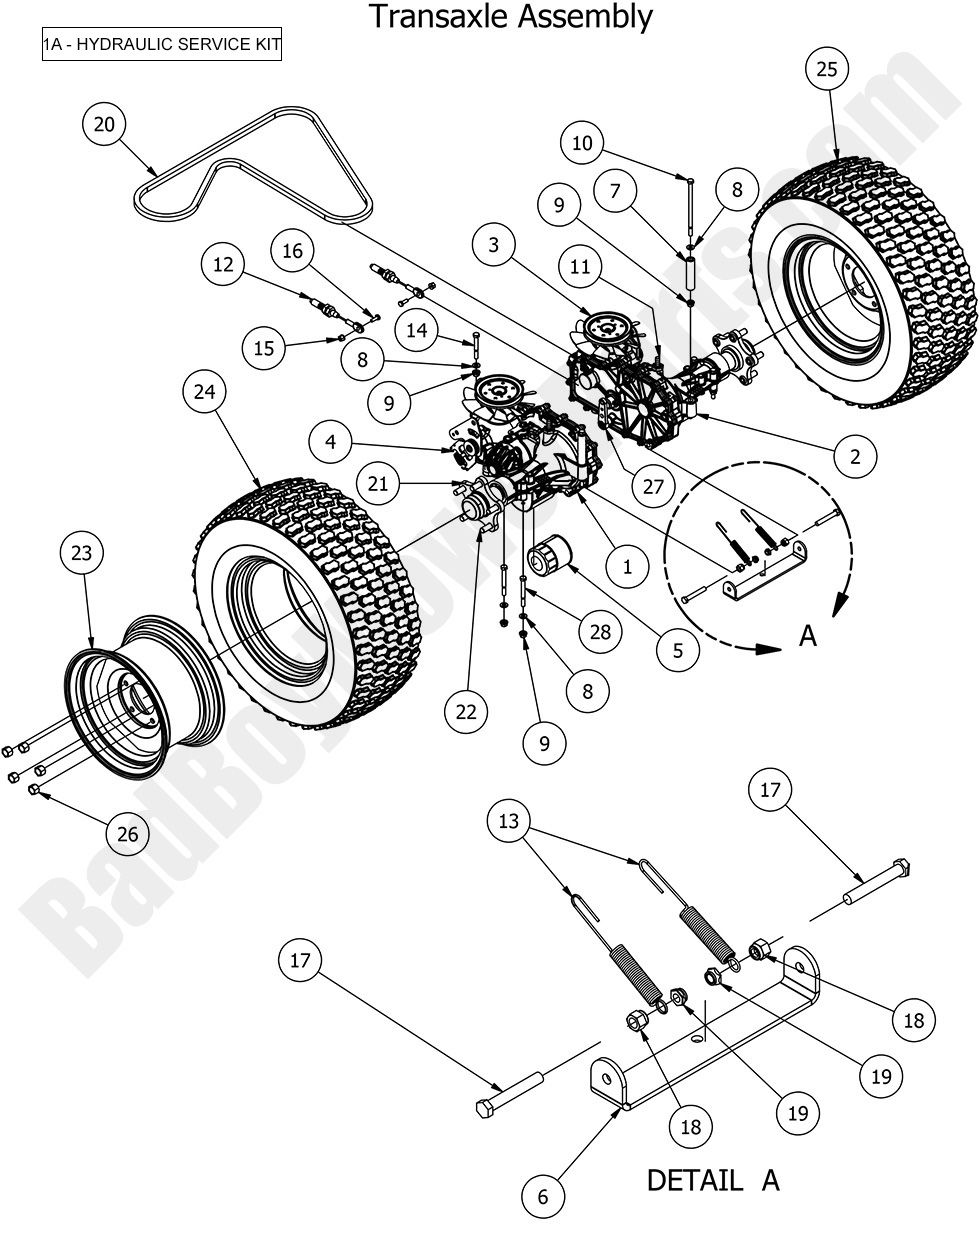 2016 Compact Outlaw|Transaxle Assembly Diagram|Bad Boy Mower Parts